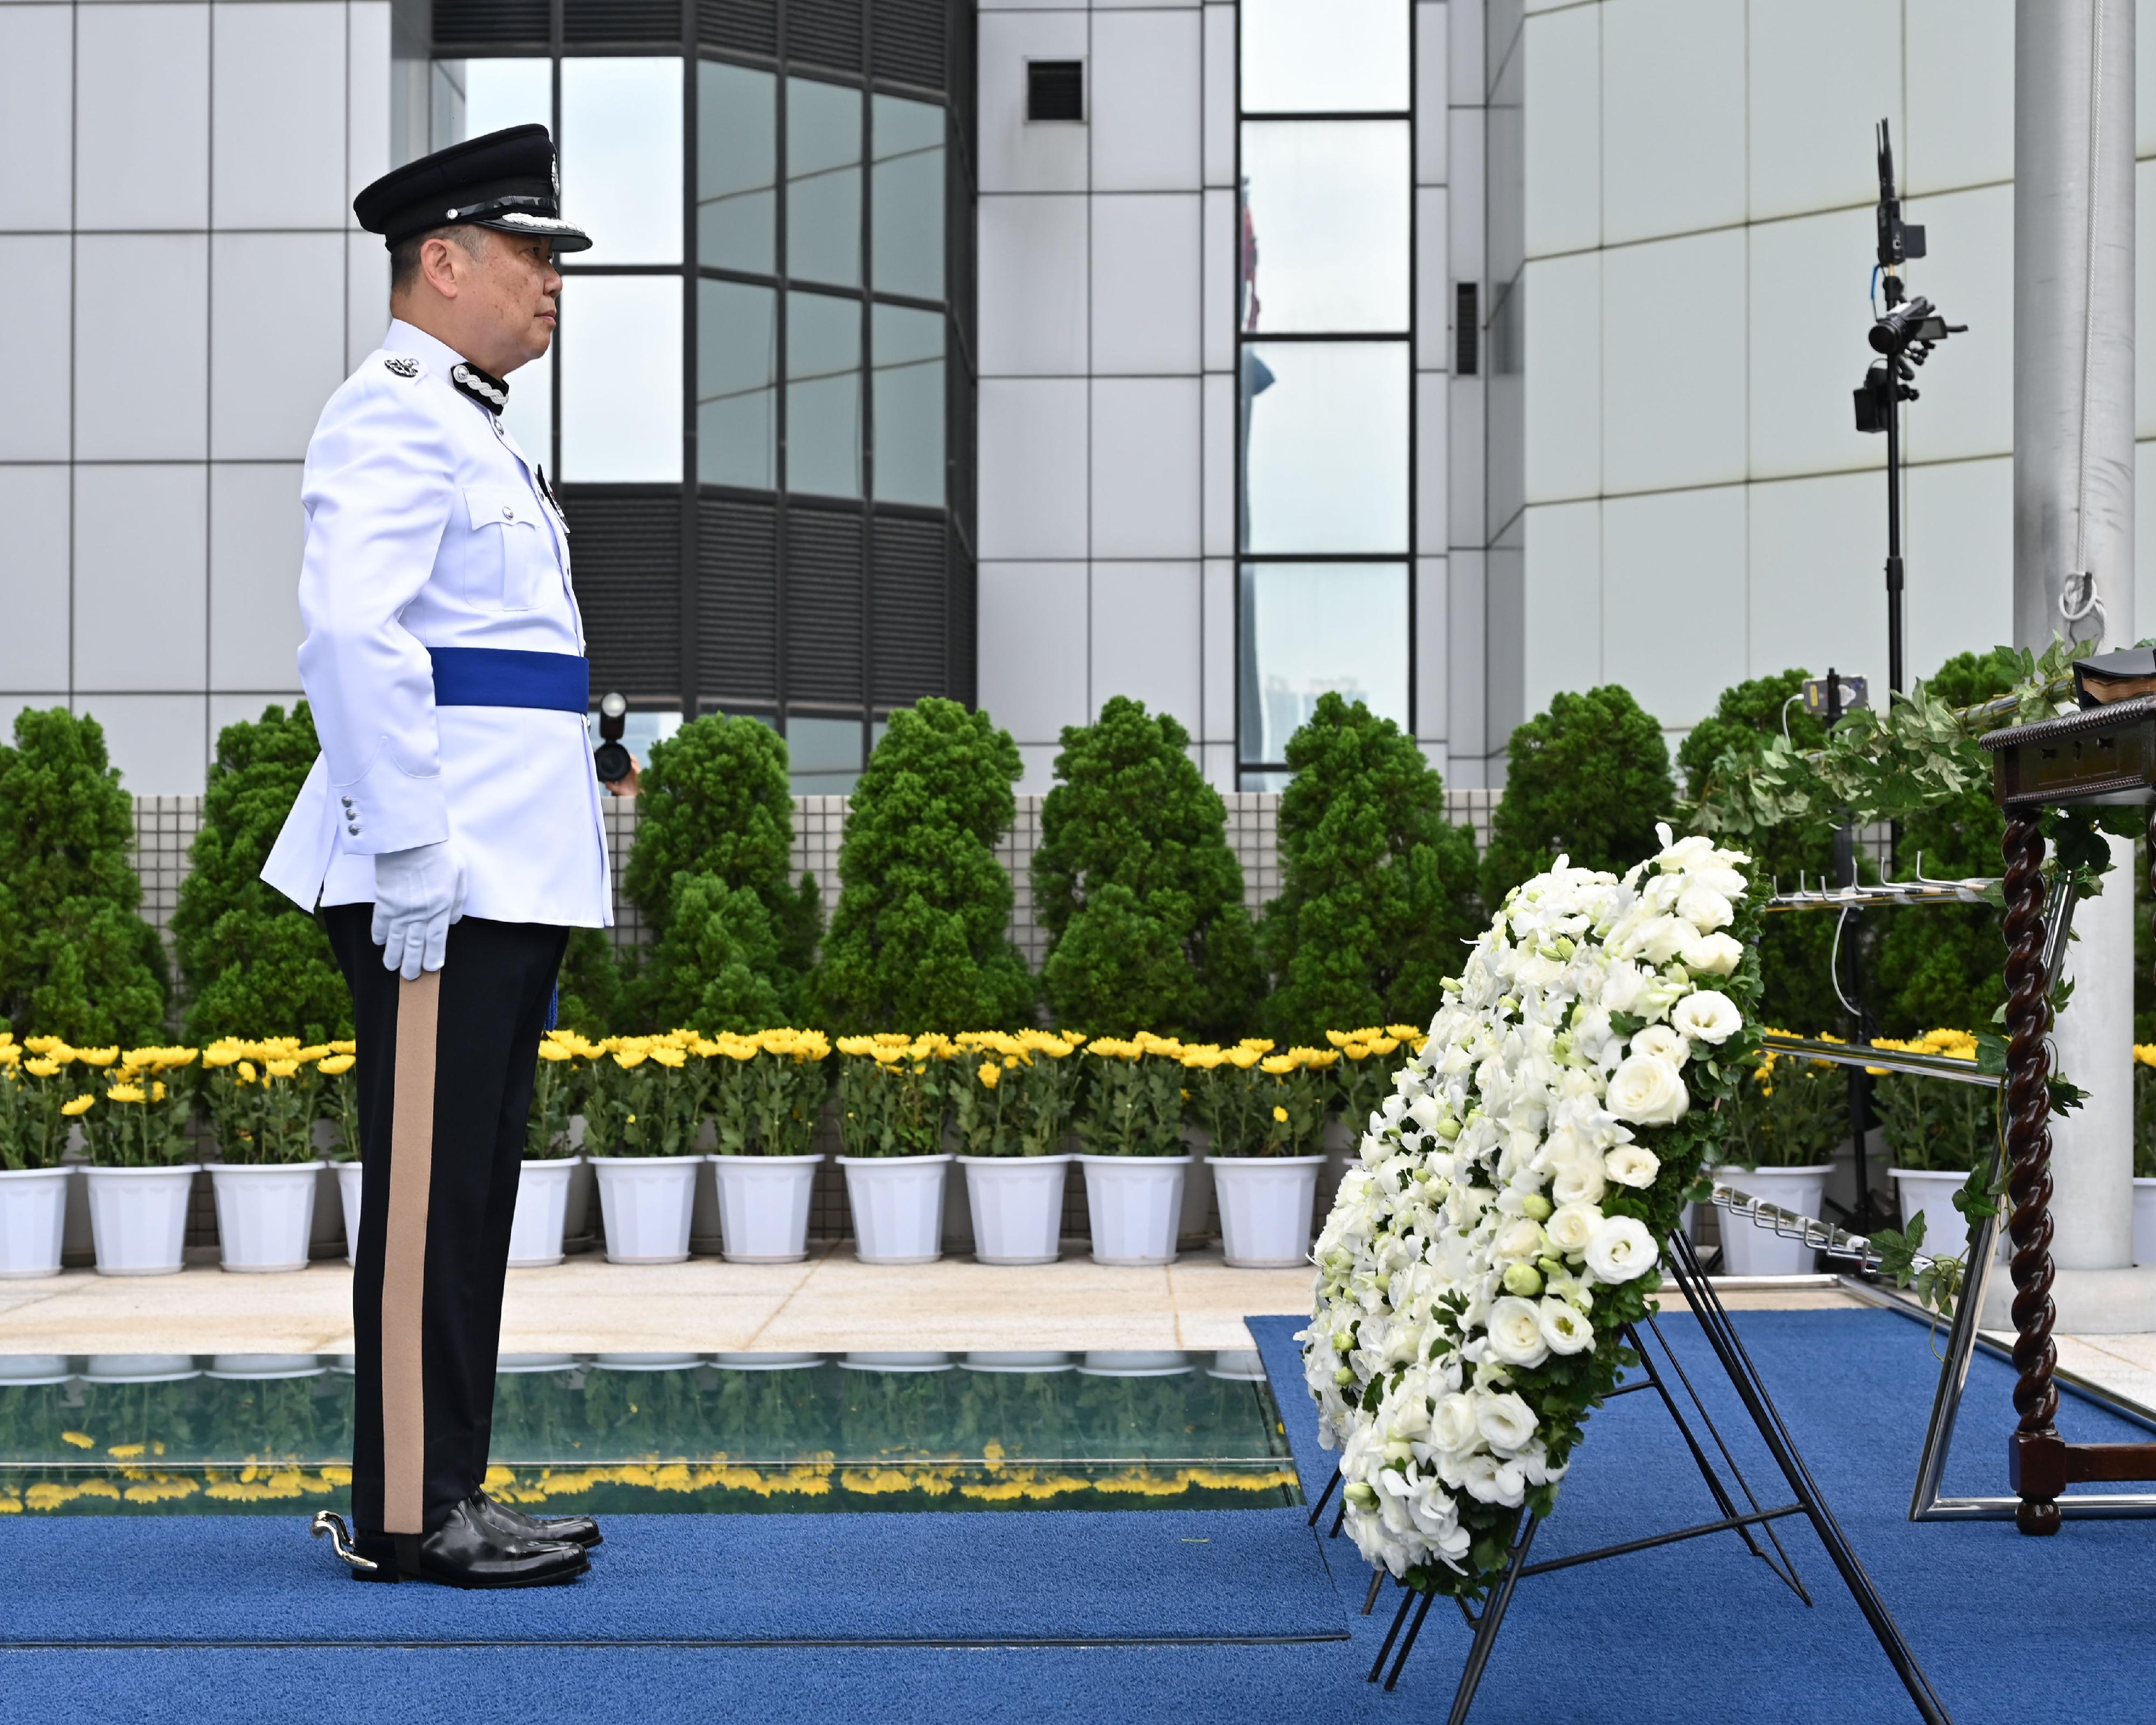 The Hong Kong Police Force holds a ceremony at the Police Headquarters this morning (November 10) to pay tribute to members of the Hong Kong Police Force and Hong Kong Auxiliary Police Force who have given their lives in the line of duty. Photo shows the Commandant of the Hong Kong Auxiliary Police Force, Mr Yang Joe-tsi, paying tribute in front of the Books of Remembrance in which the names of the fallen are inscribed.